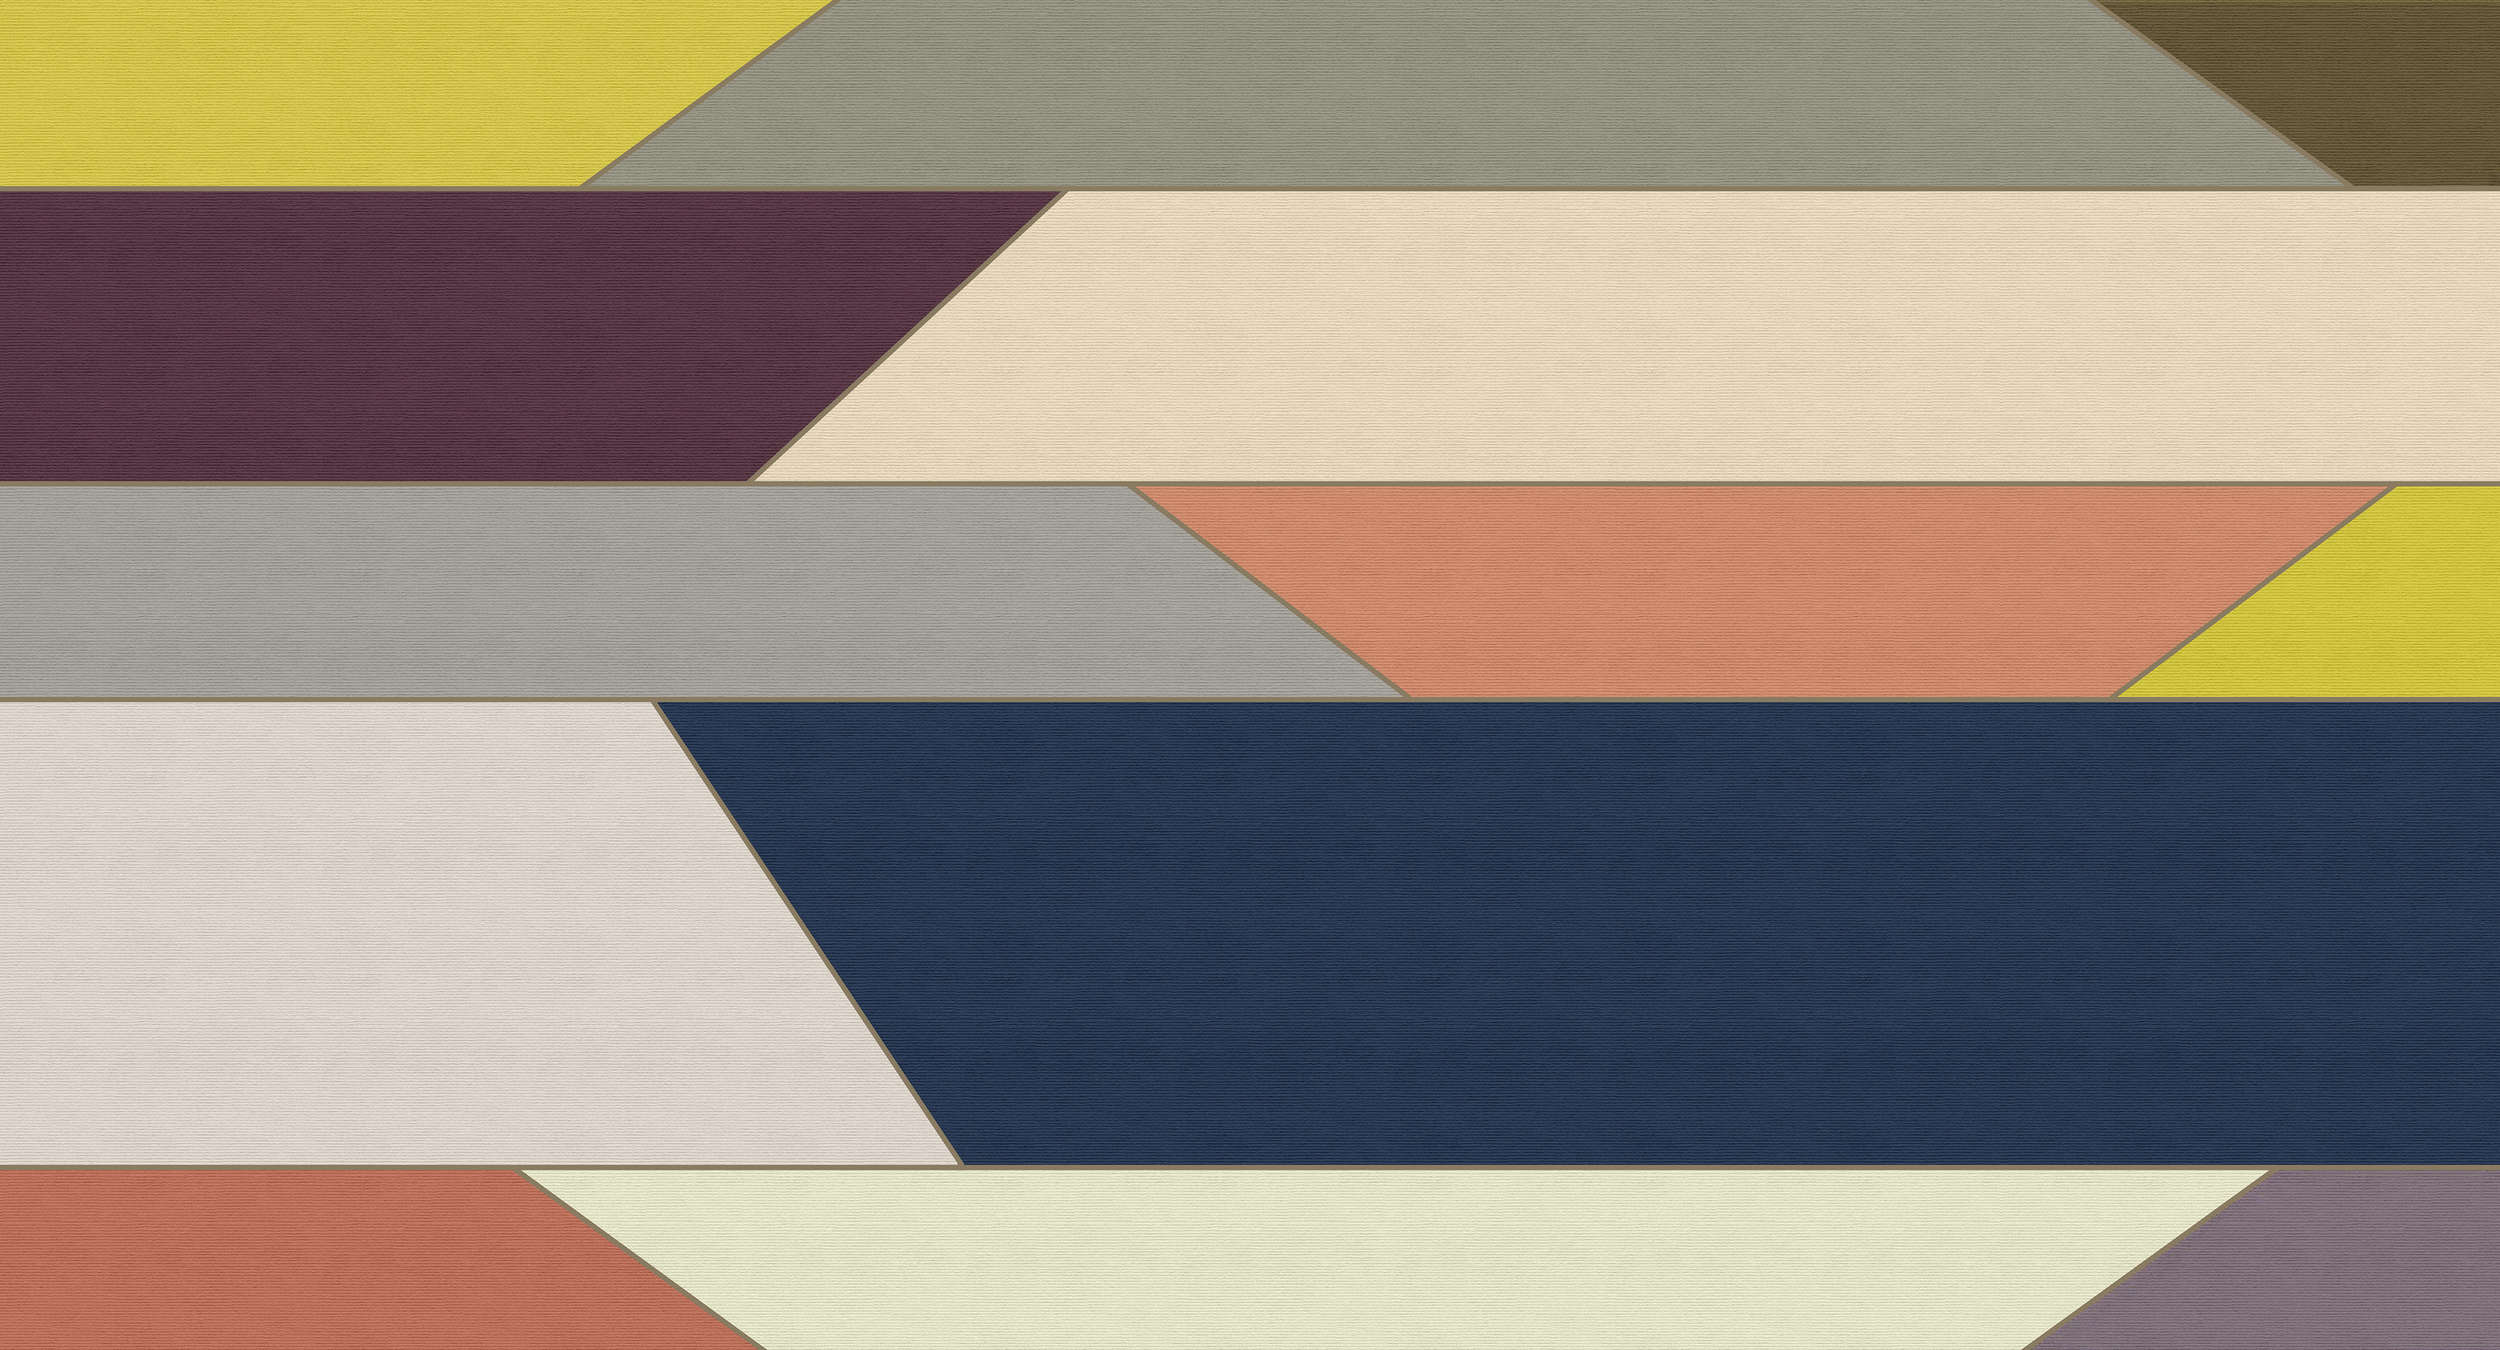             Geometry 1 - Photo wallpaper with colourful horizontal stripe pattern - ribbed structure - Beige, Blue | Matt smooth fleece
        